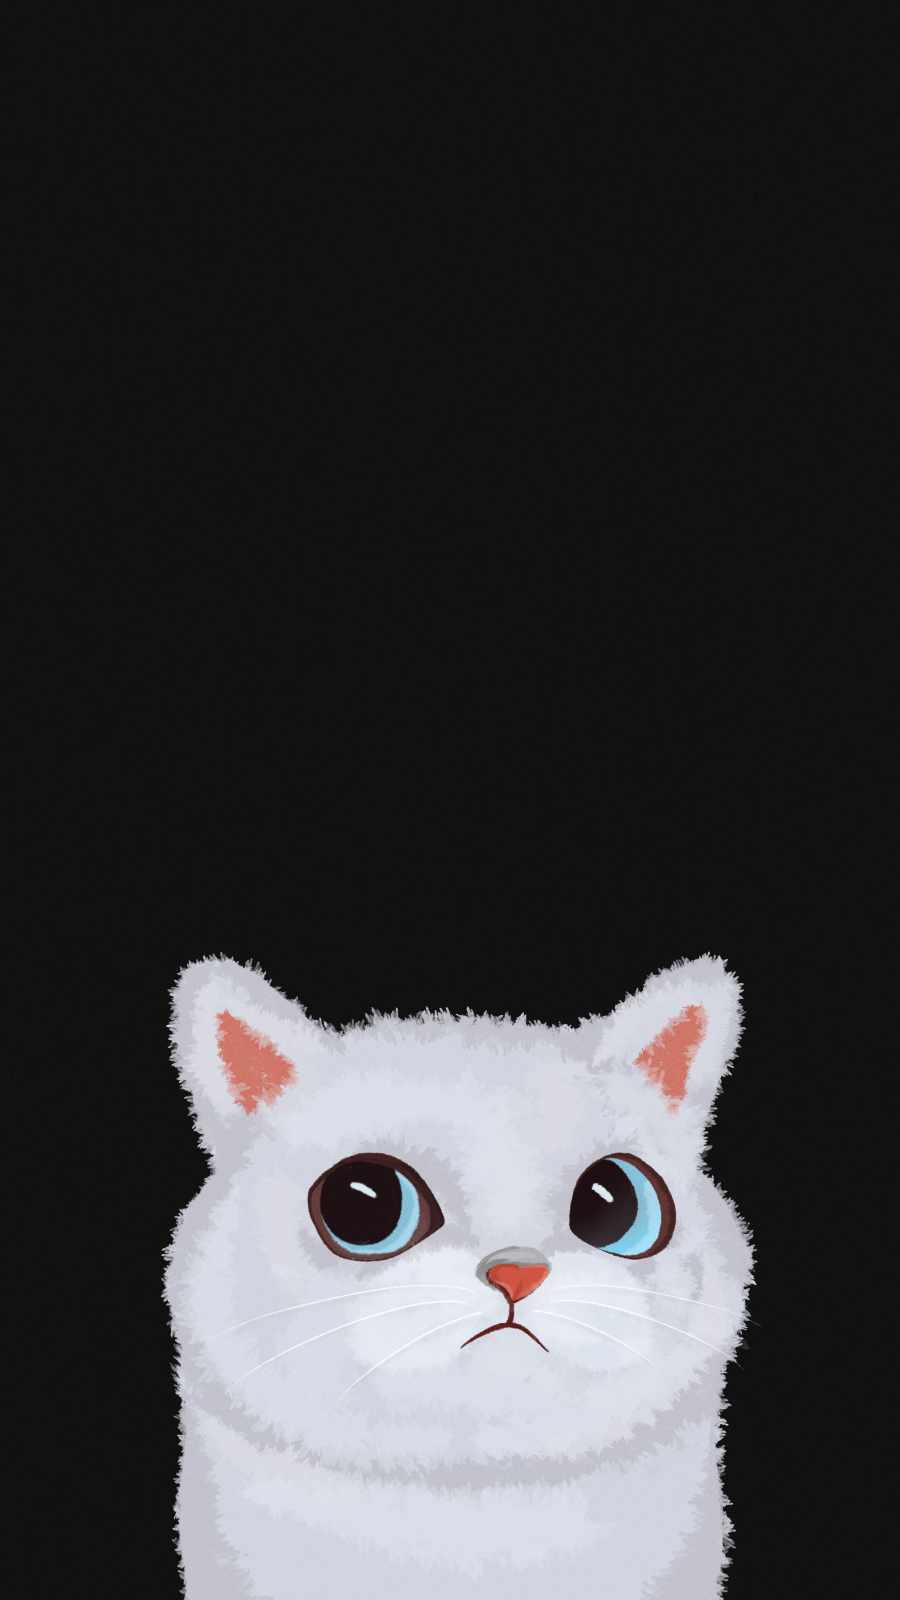 Cute White Cat IPhone Wallpaper - IPhone Wallpapers : iPhone Wallpapers